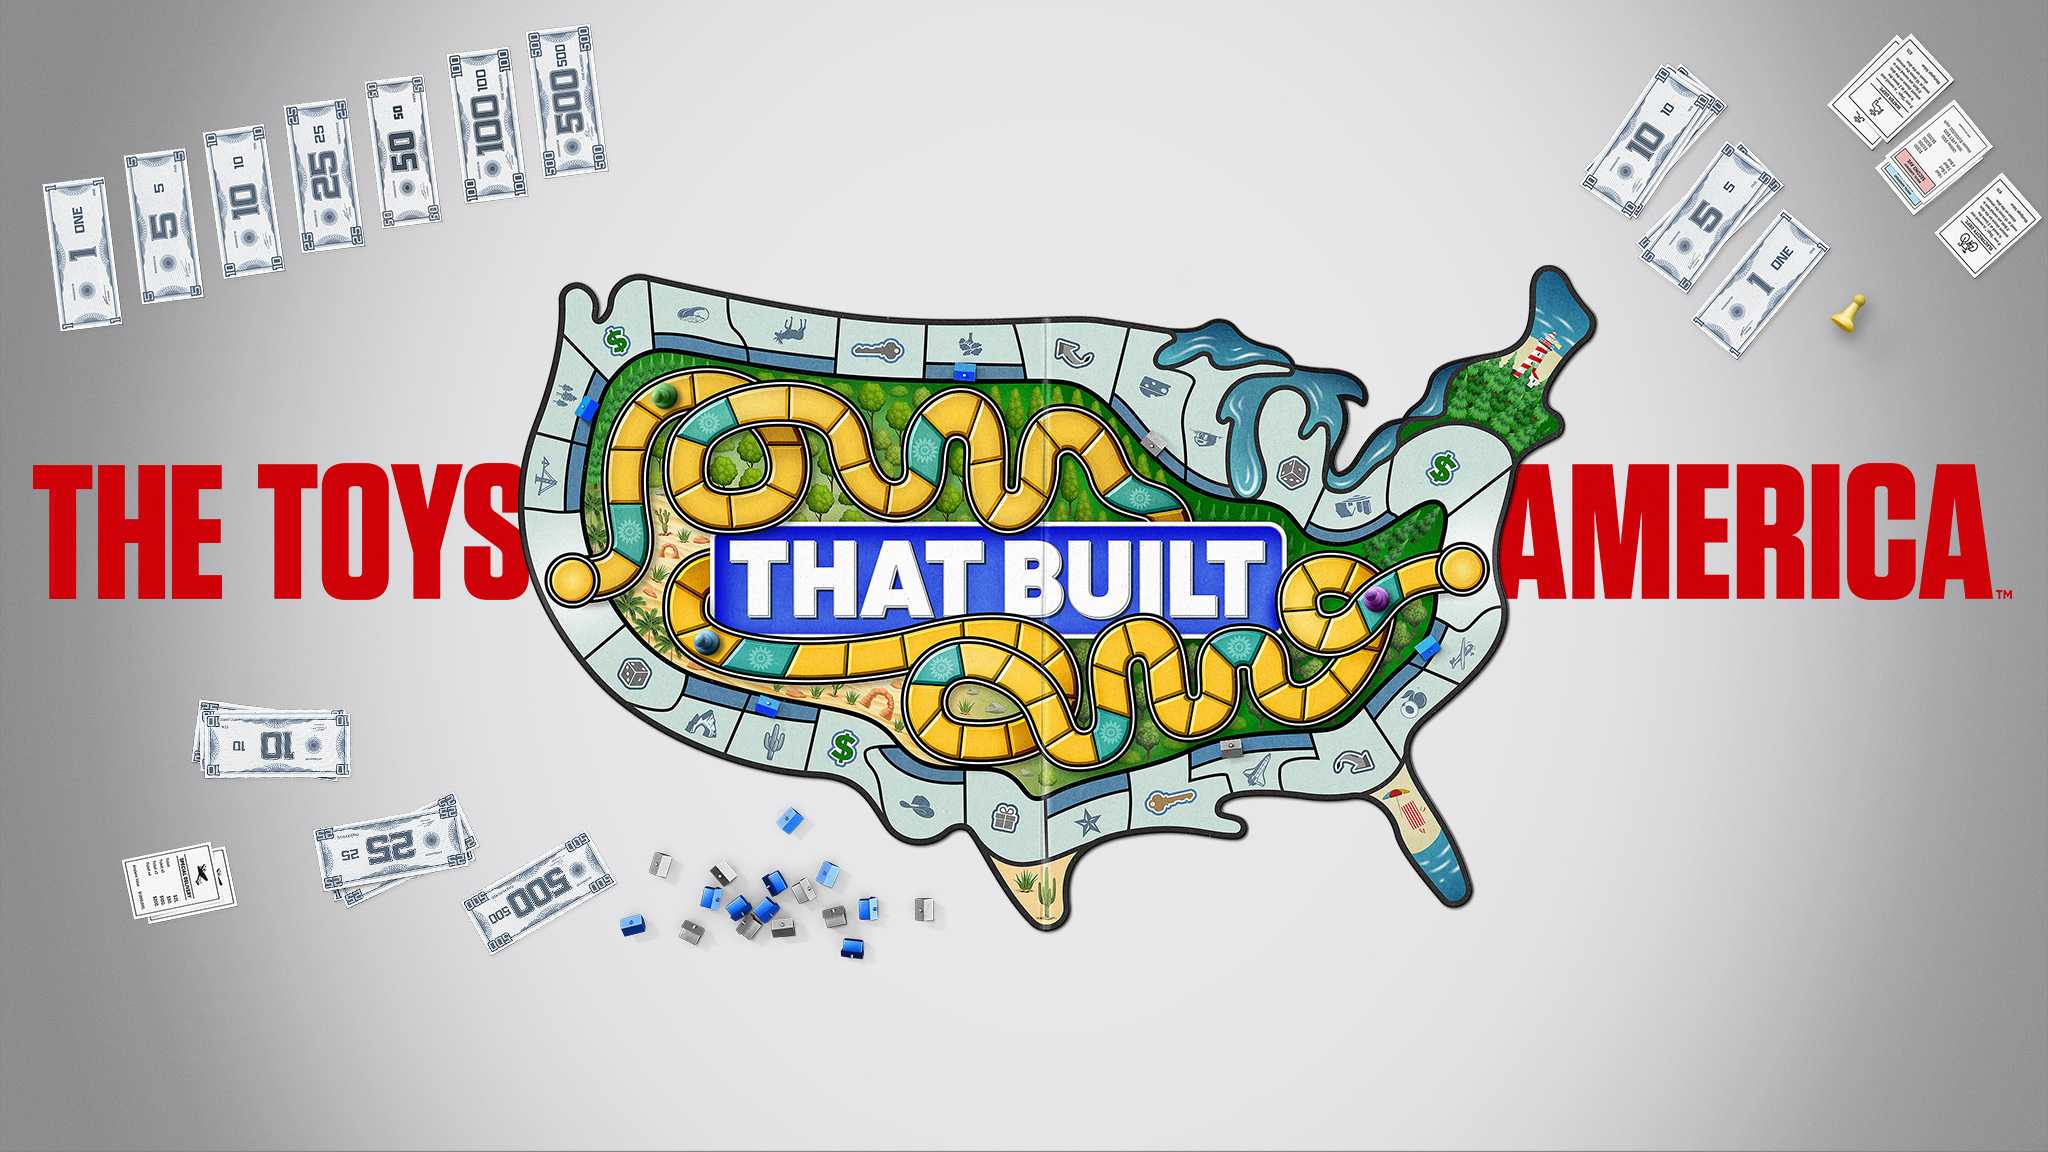 The Toys That Built America - The Toys That Built America